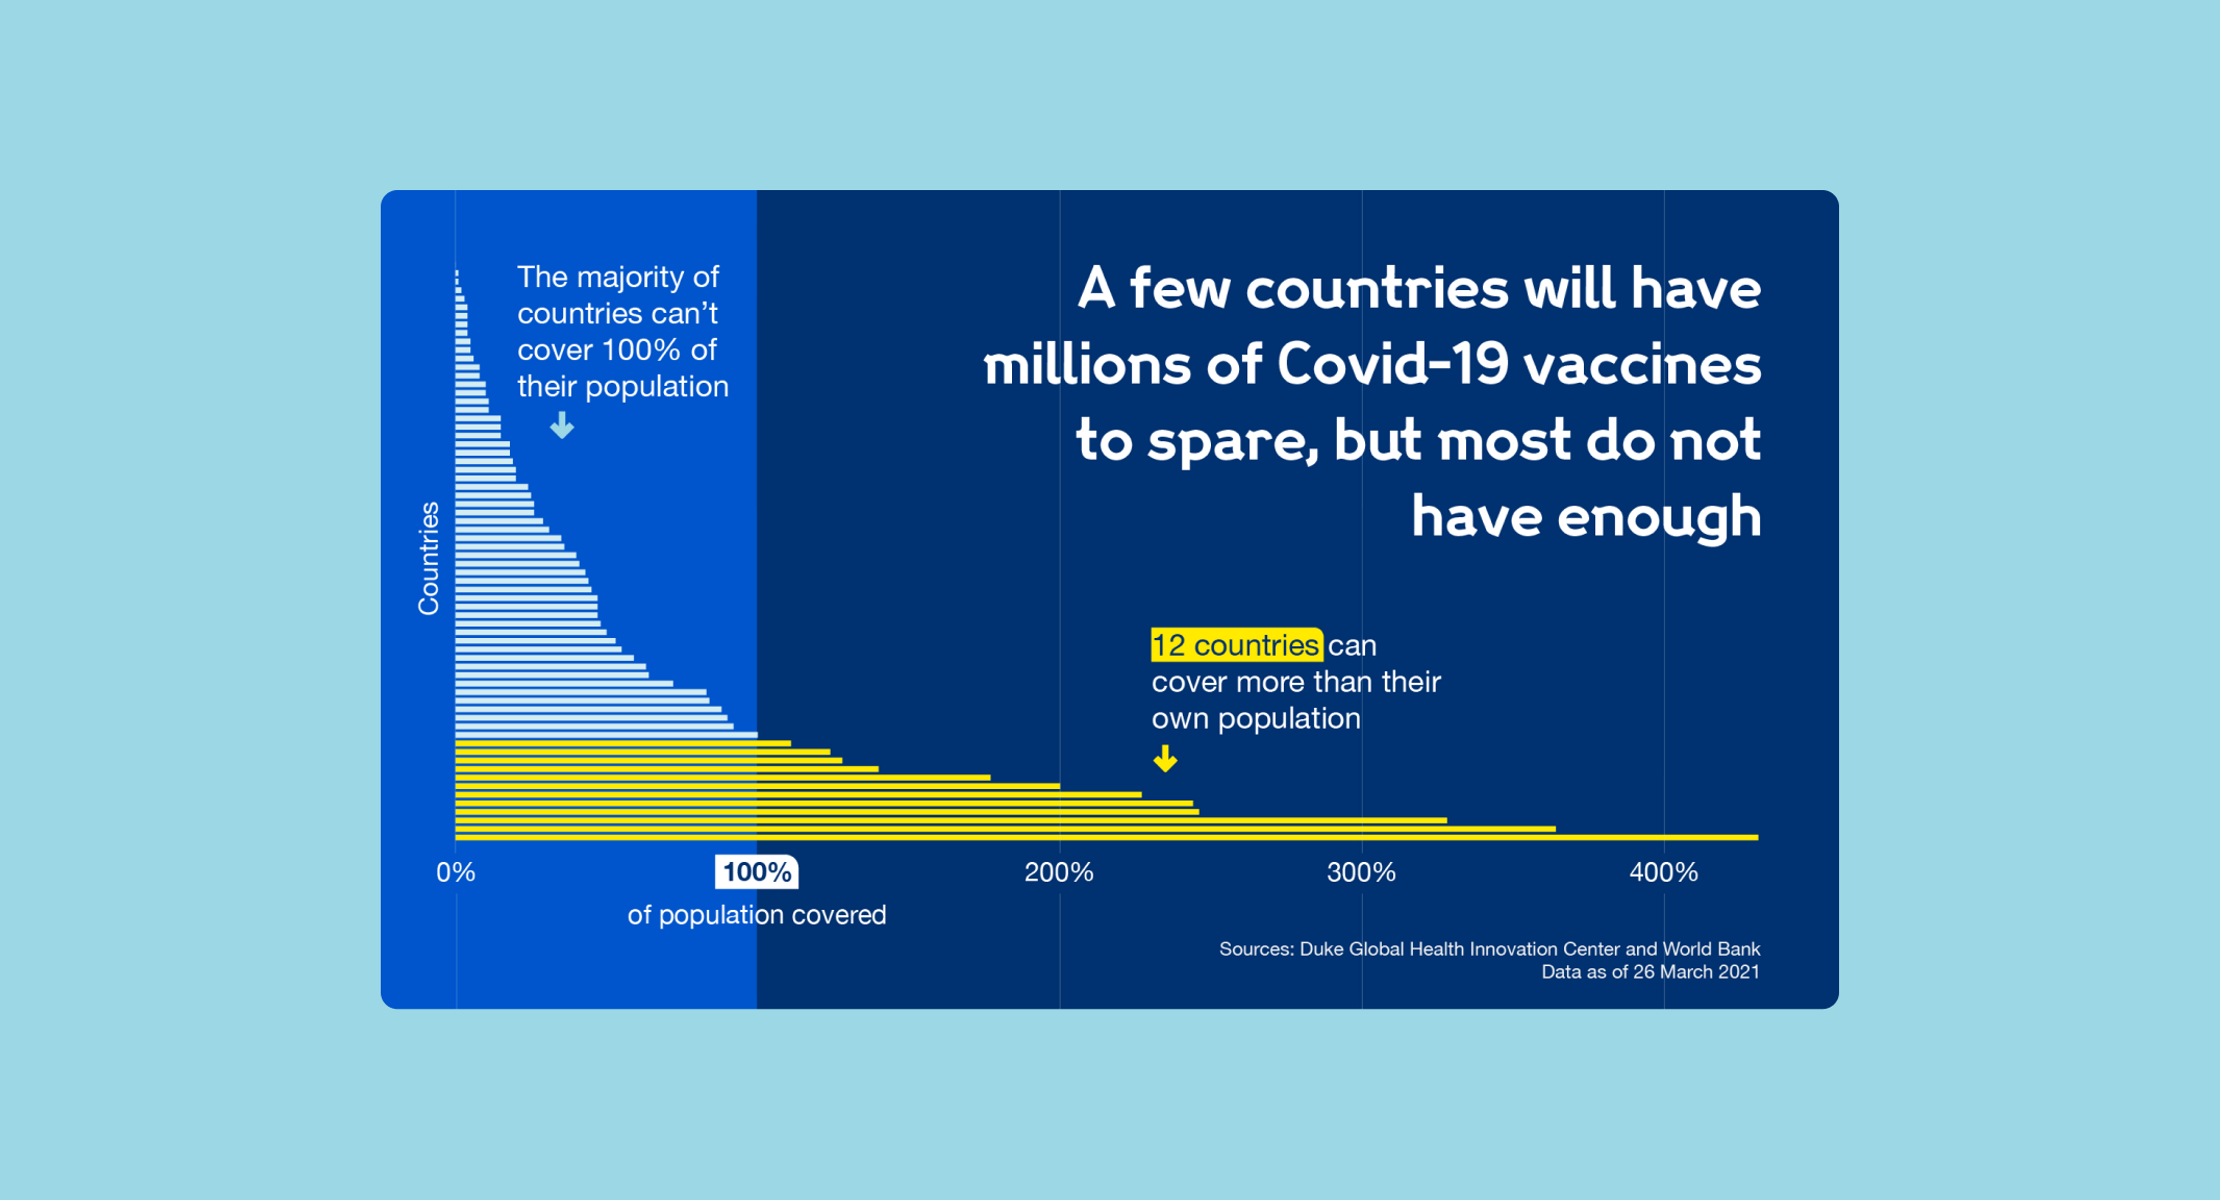 A horizontal bar chart showing the percentage of their populations countries were able to cover with their vaccine supplies as of March 2021. It shows 12 countries could cover more than their populations, while the majority can't protect everyone in the country.